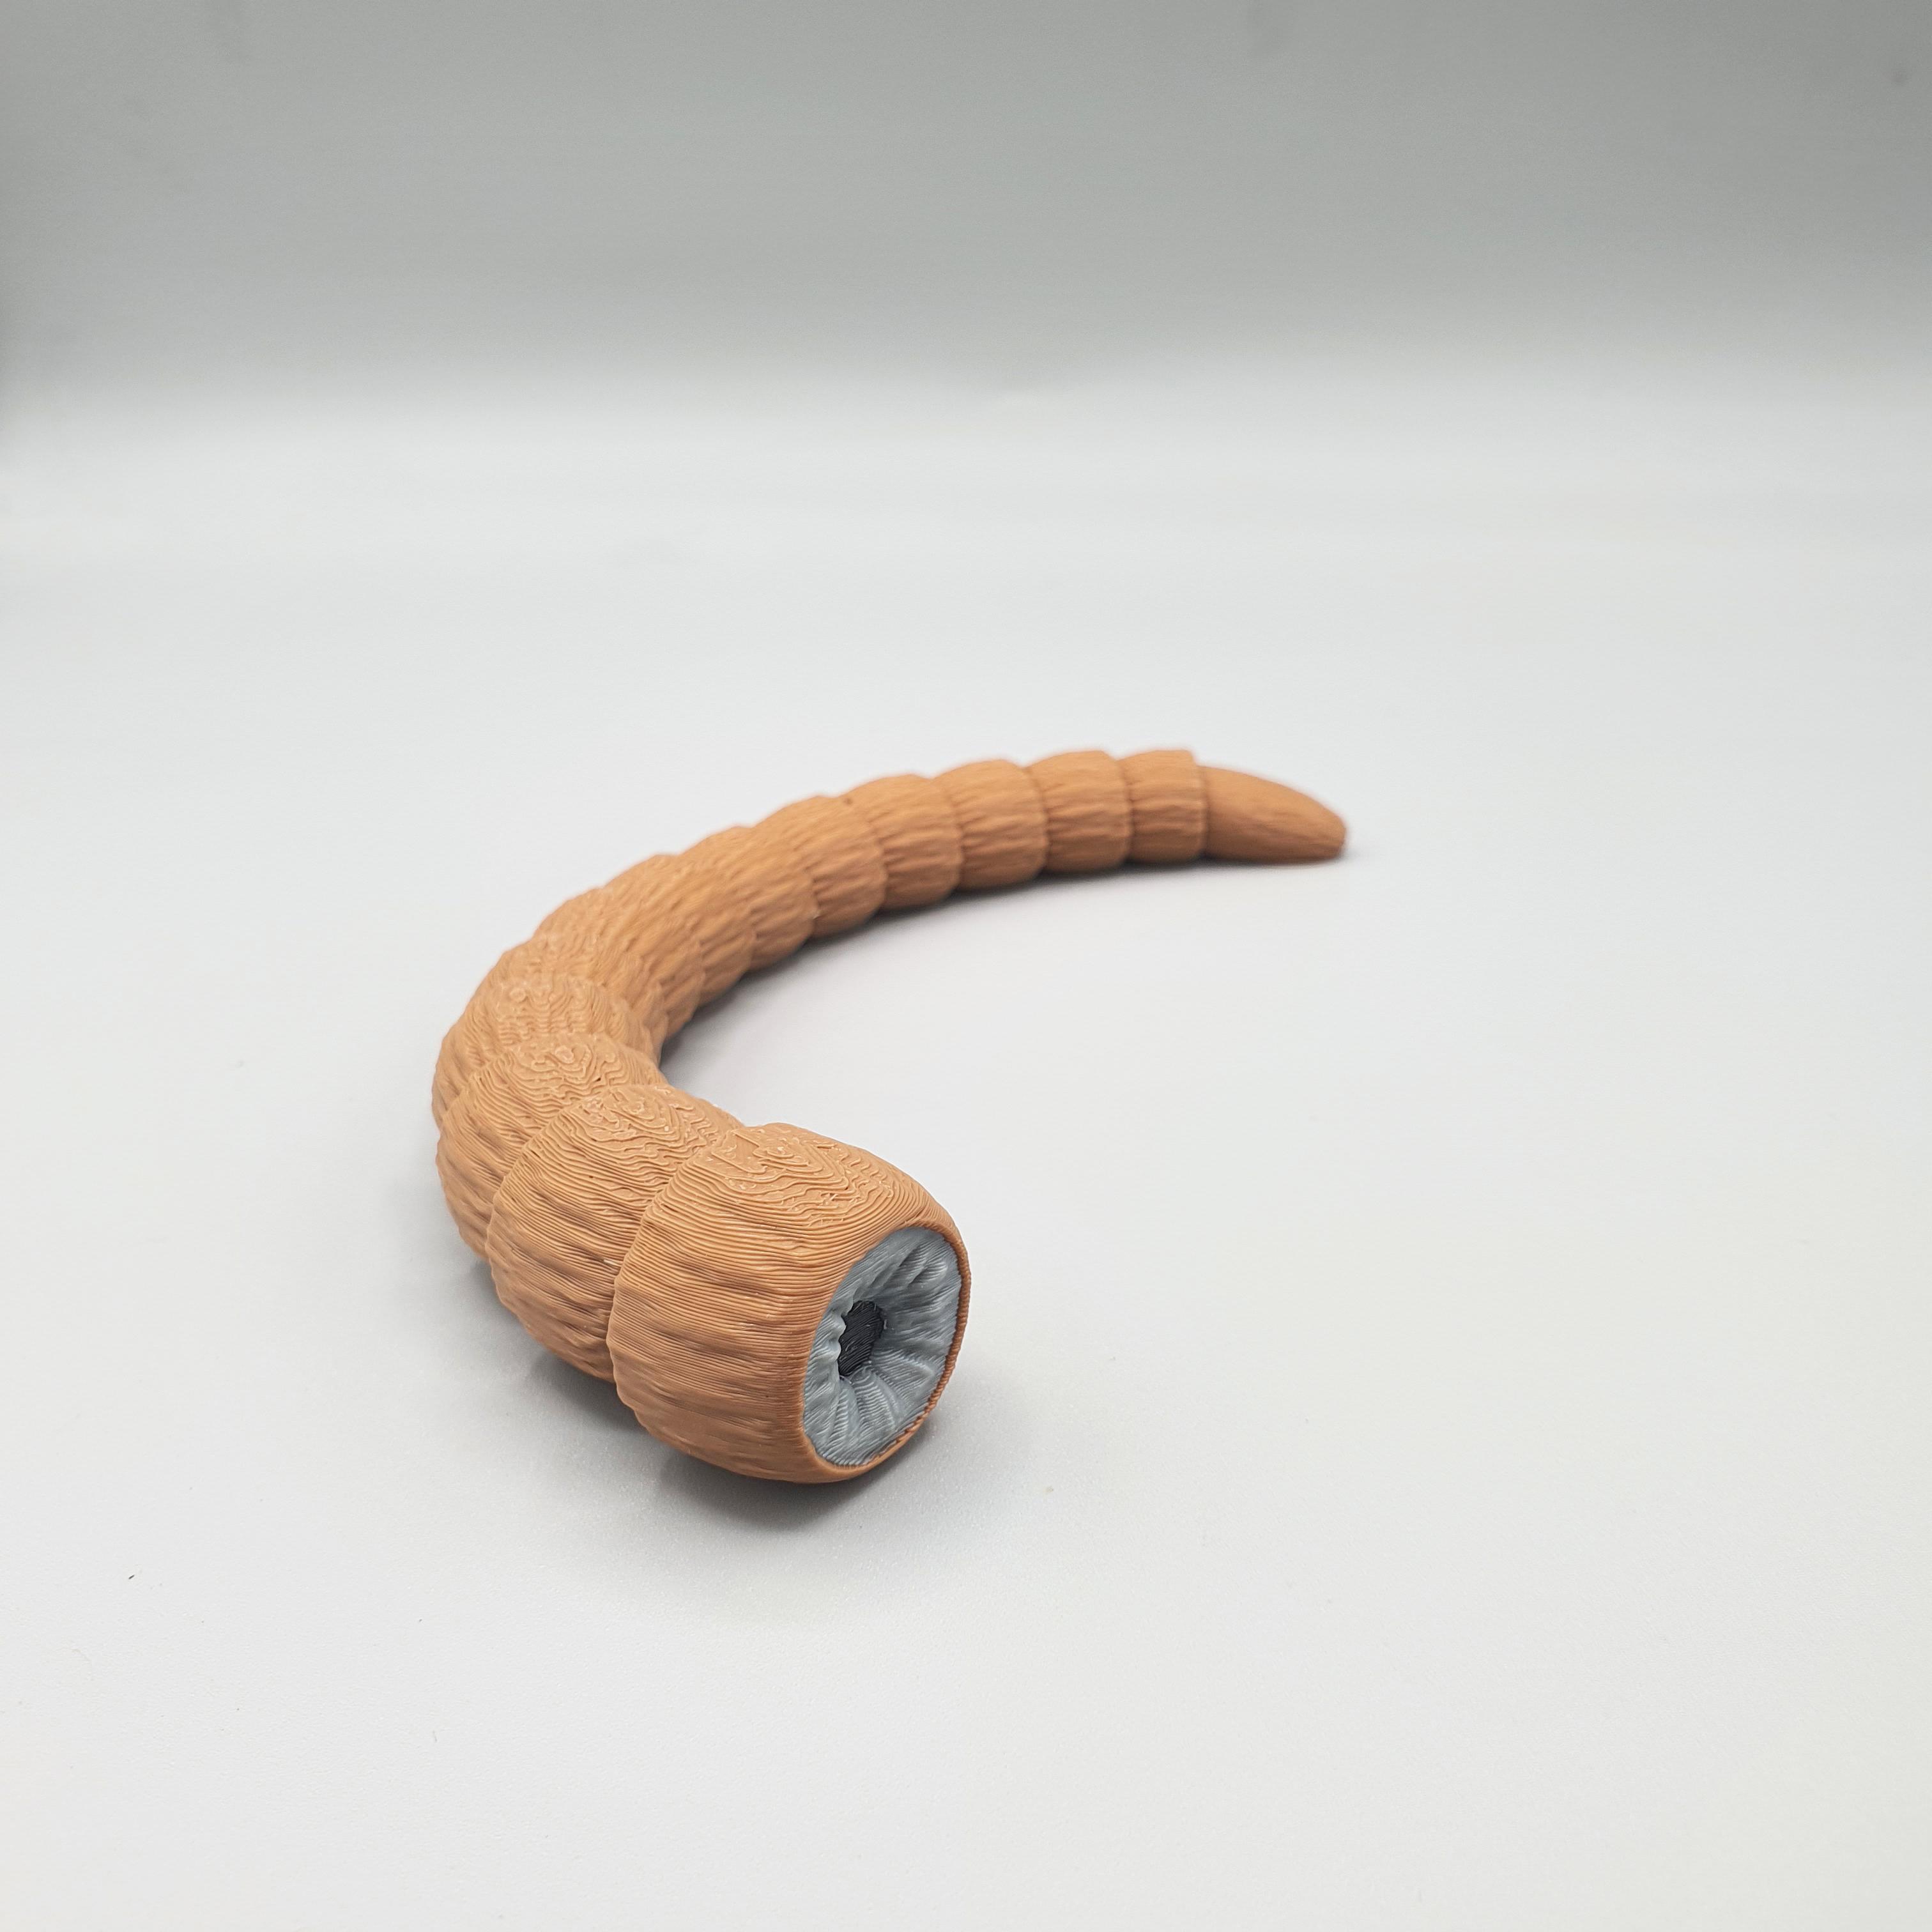 DUNE ARTICULATE SANDWORM FLEXI WITH BASE 3d model